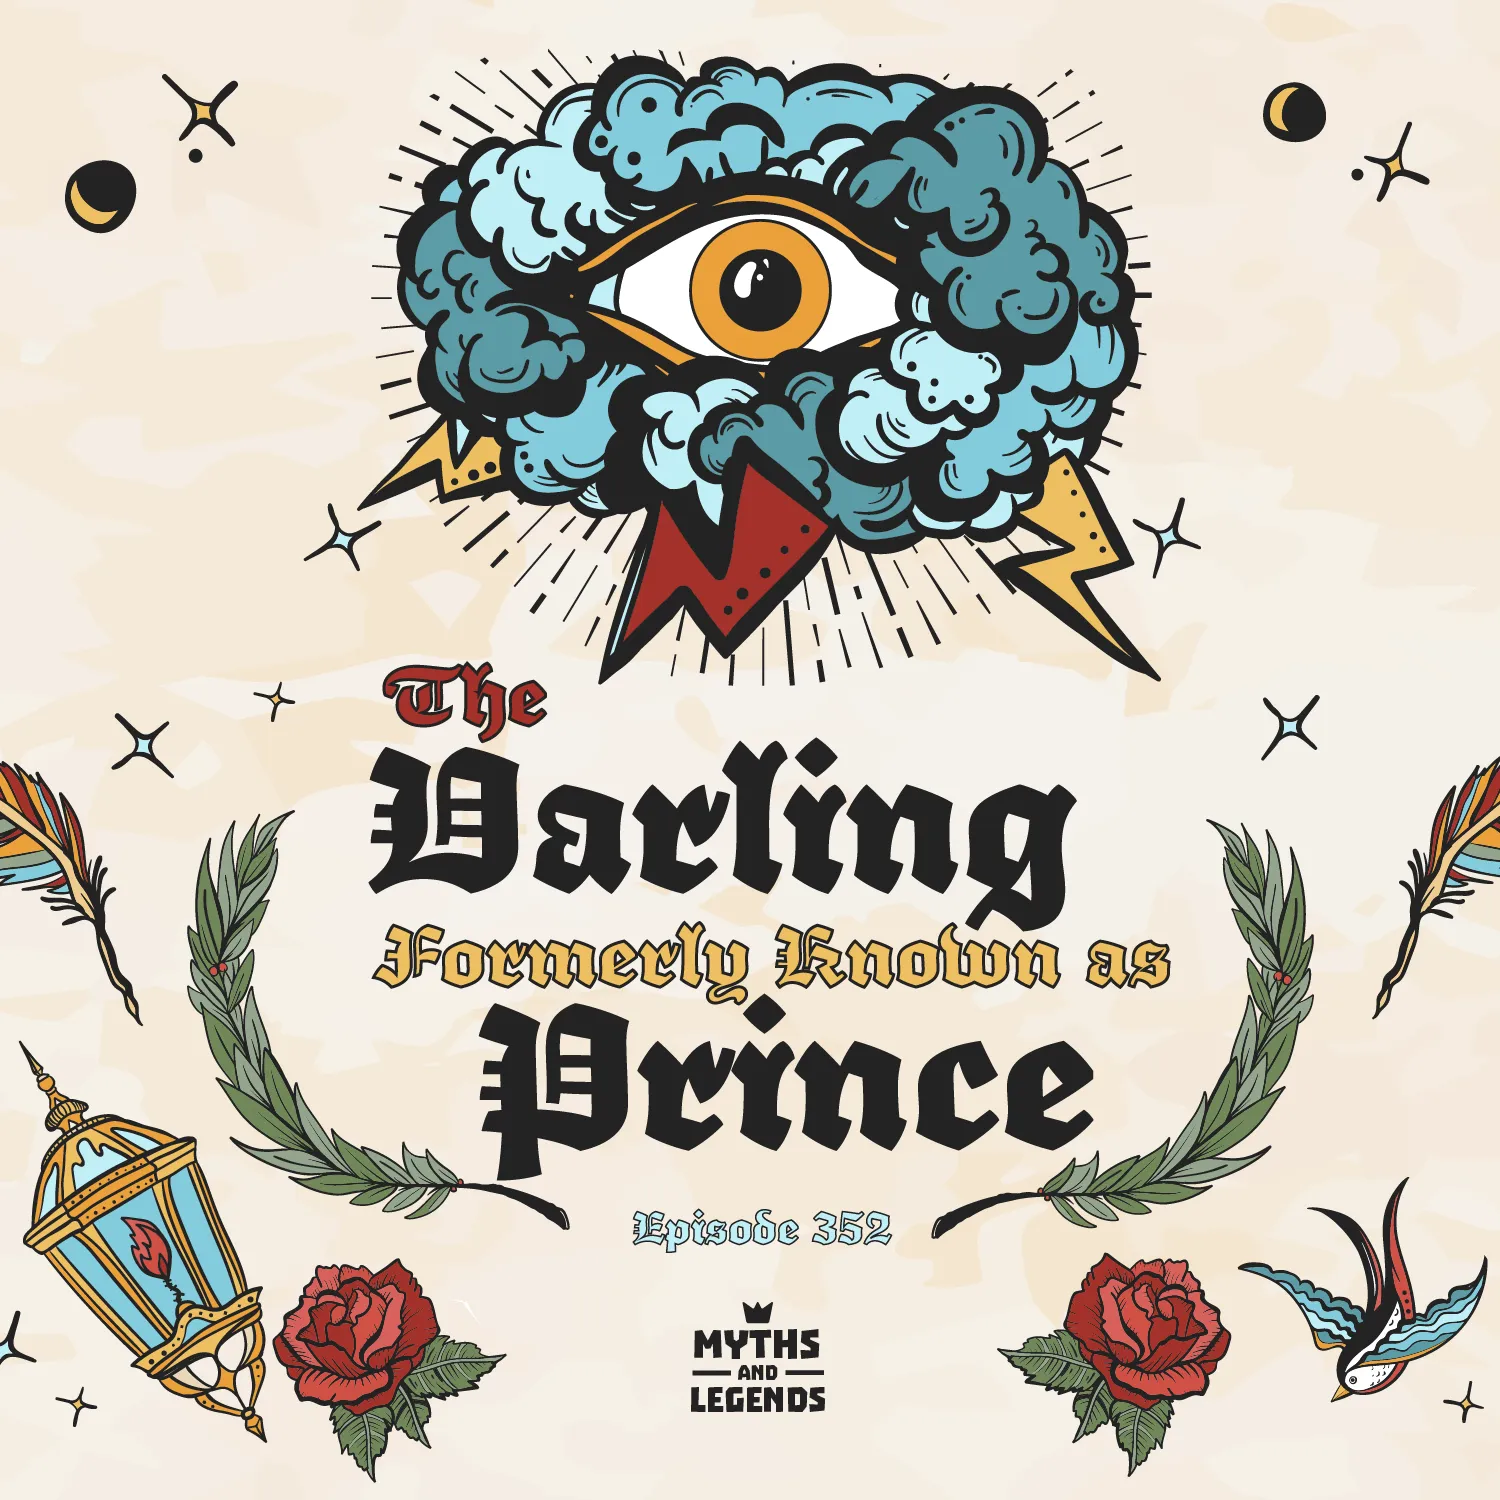 Graphic illustration for 'The Darling Formerly Known as Prince,' Episode 352 of the 'Myths and Legends' podcast. The central image is a prominent eye surrounded by a cloud-like form, with hand-drawn elements such as a lightning bolts and flowers. Decorative motifs include an oil lamp, arrows, feathers, and small stars and moons, all set against a cream-colored background with a vintage texture.